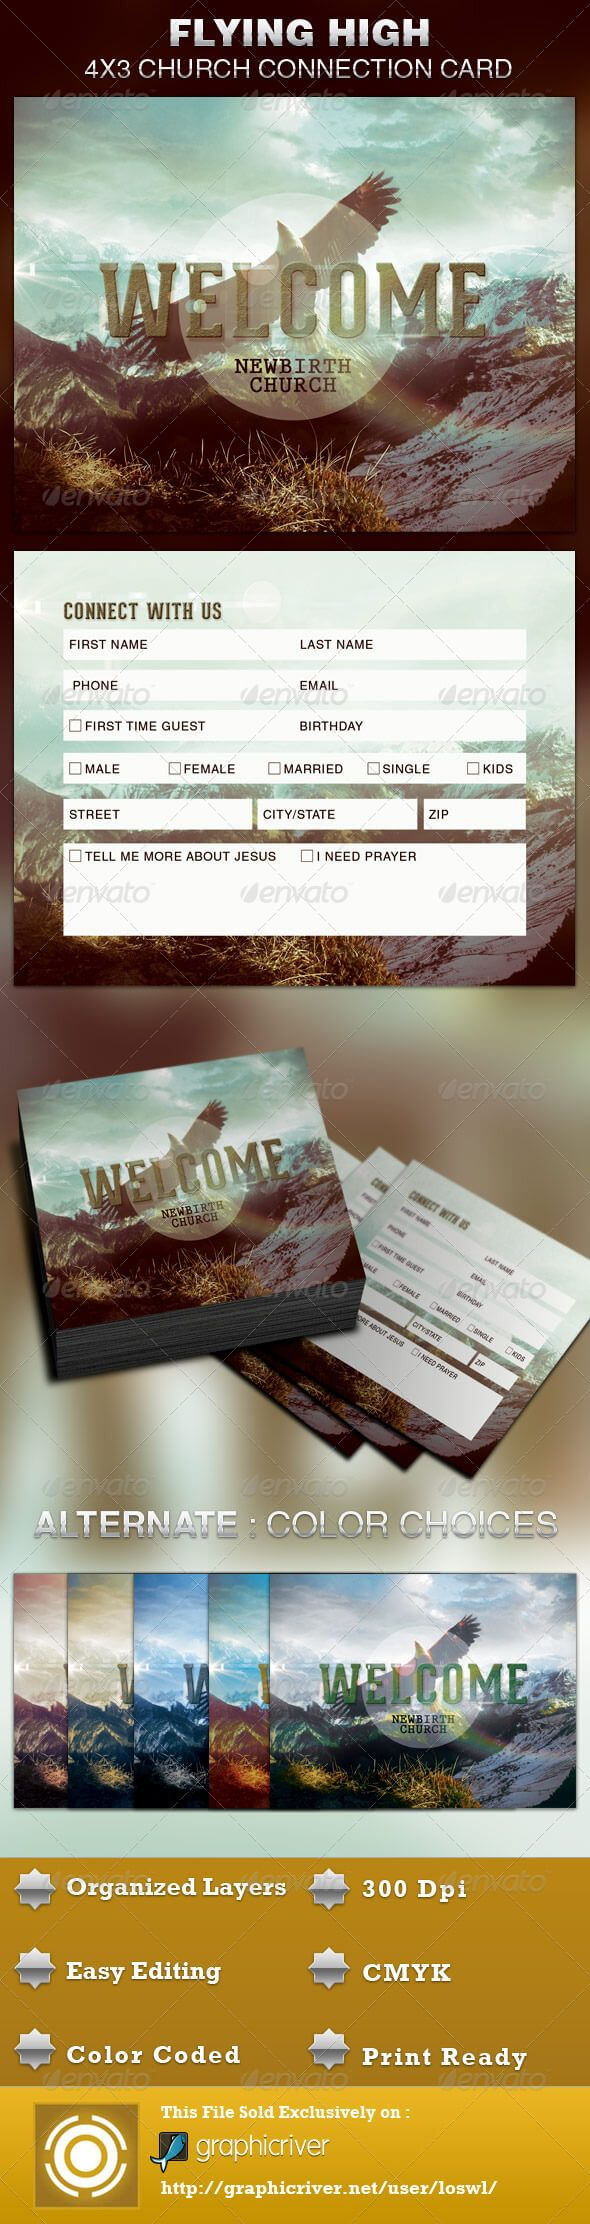 The Flying High Church Connection Card Template Is Great For Intended For Decision Card Template